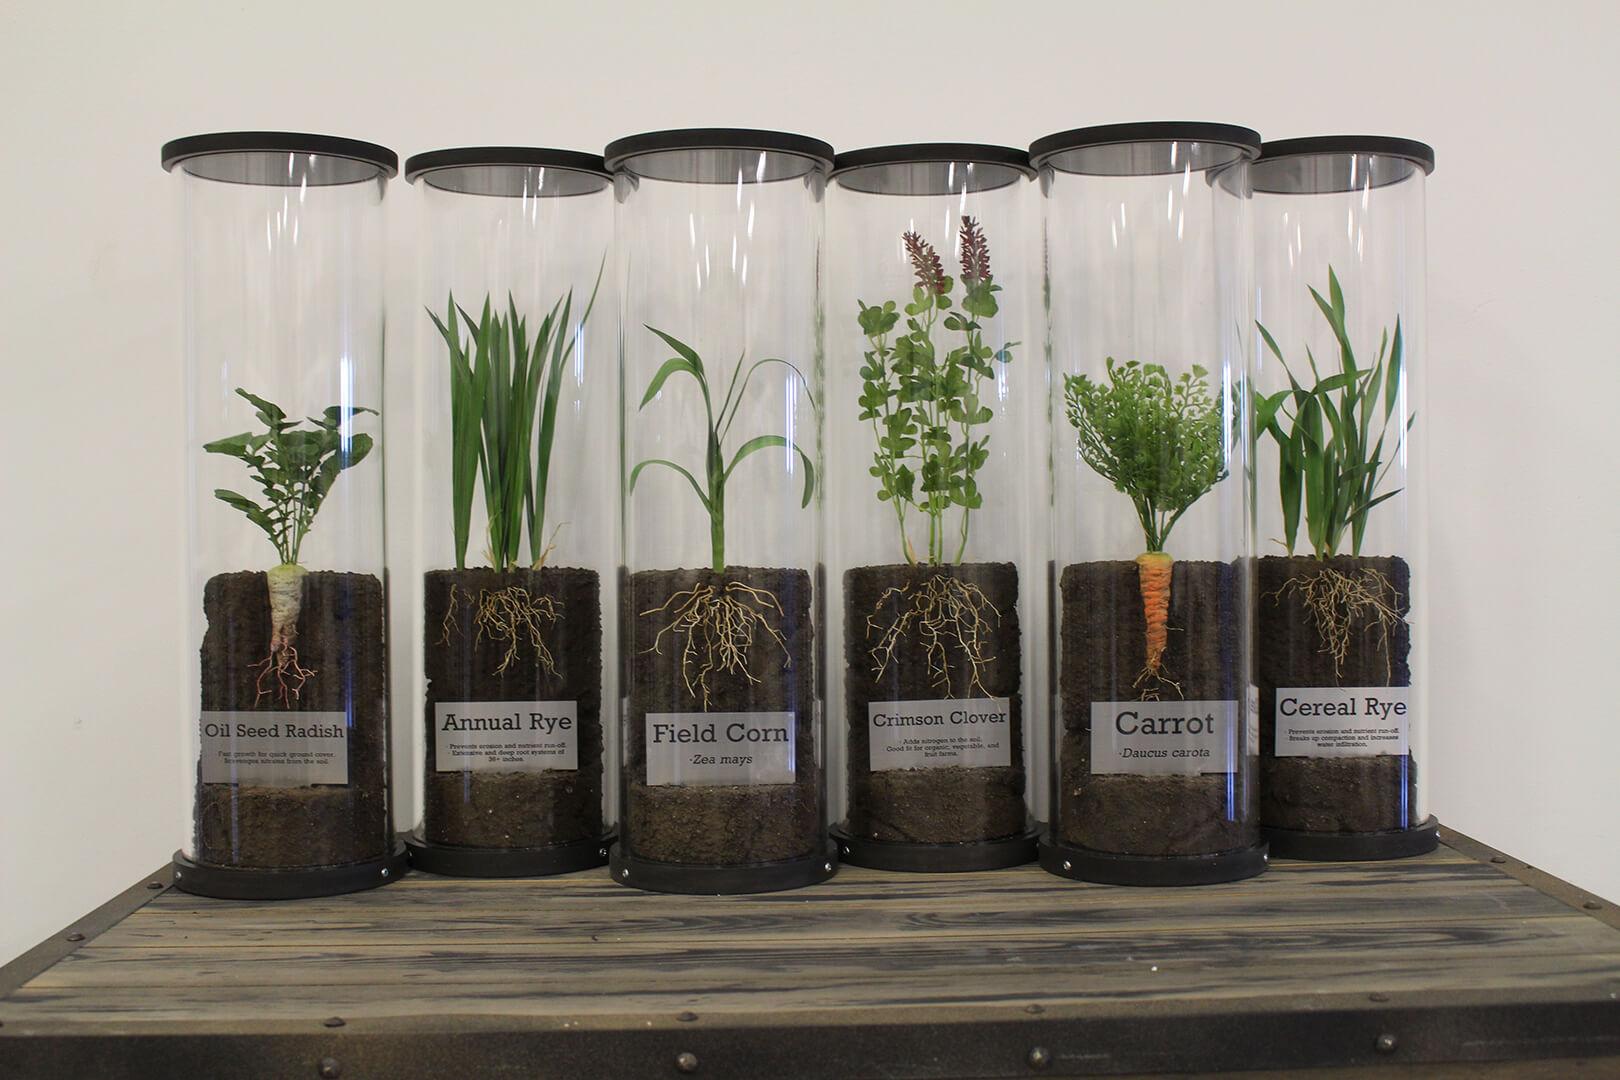 Six lifelike artificial plants representing different types of cover crops